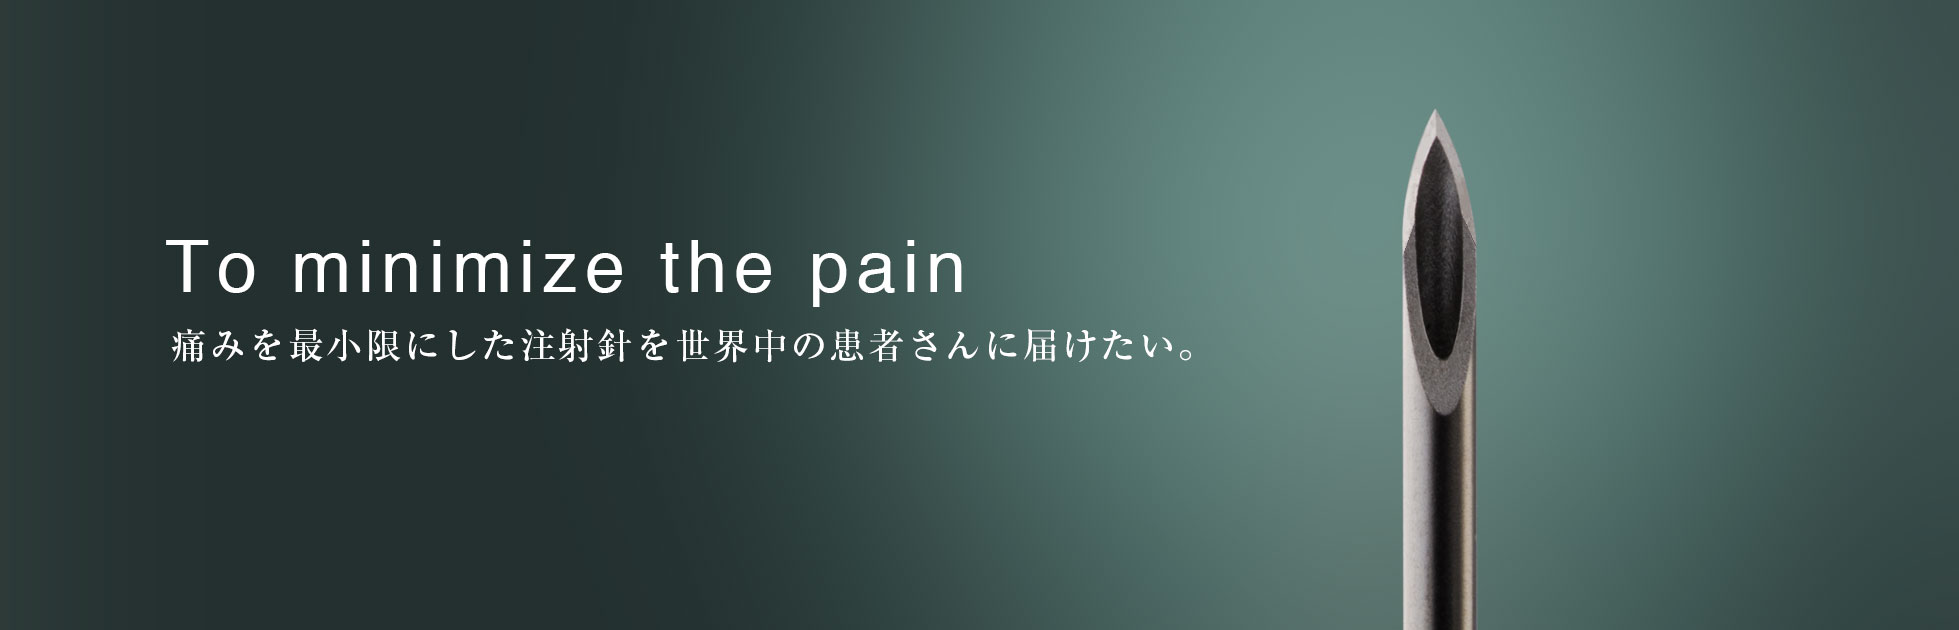 To minimize the pain